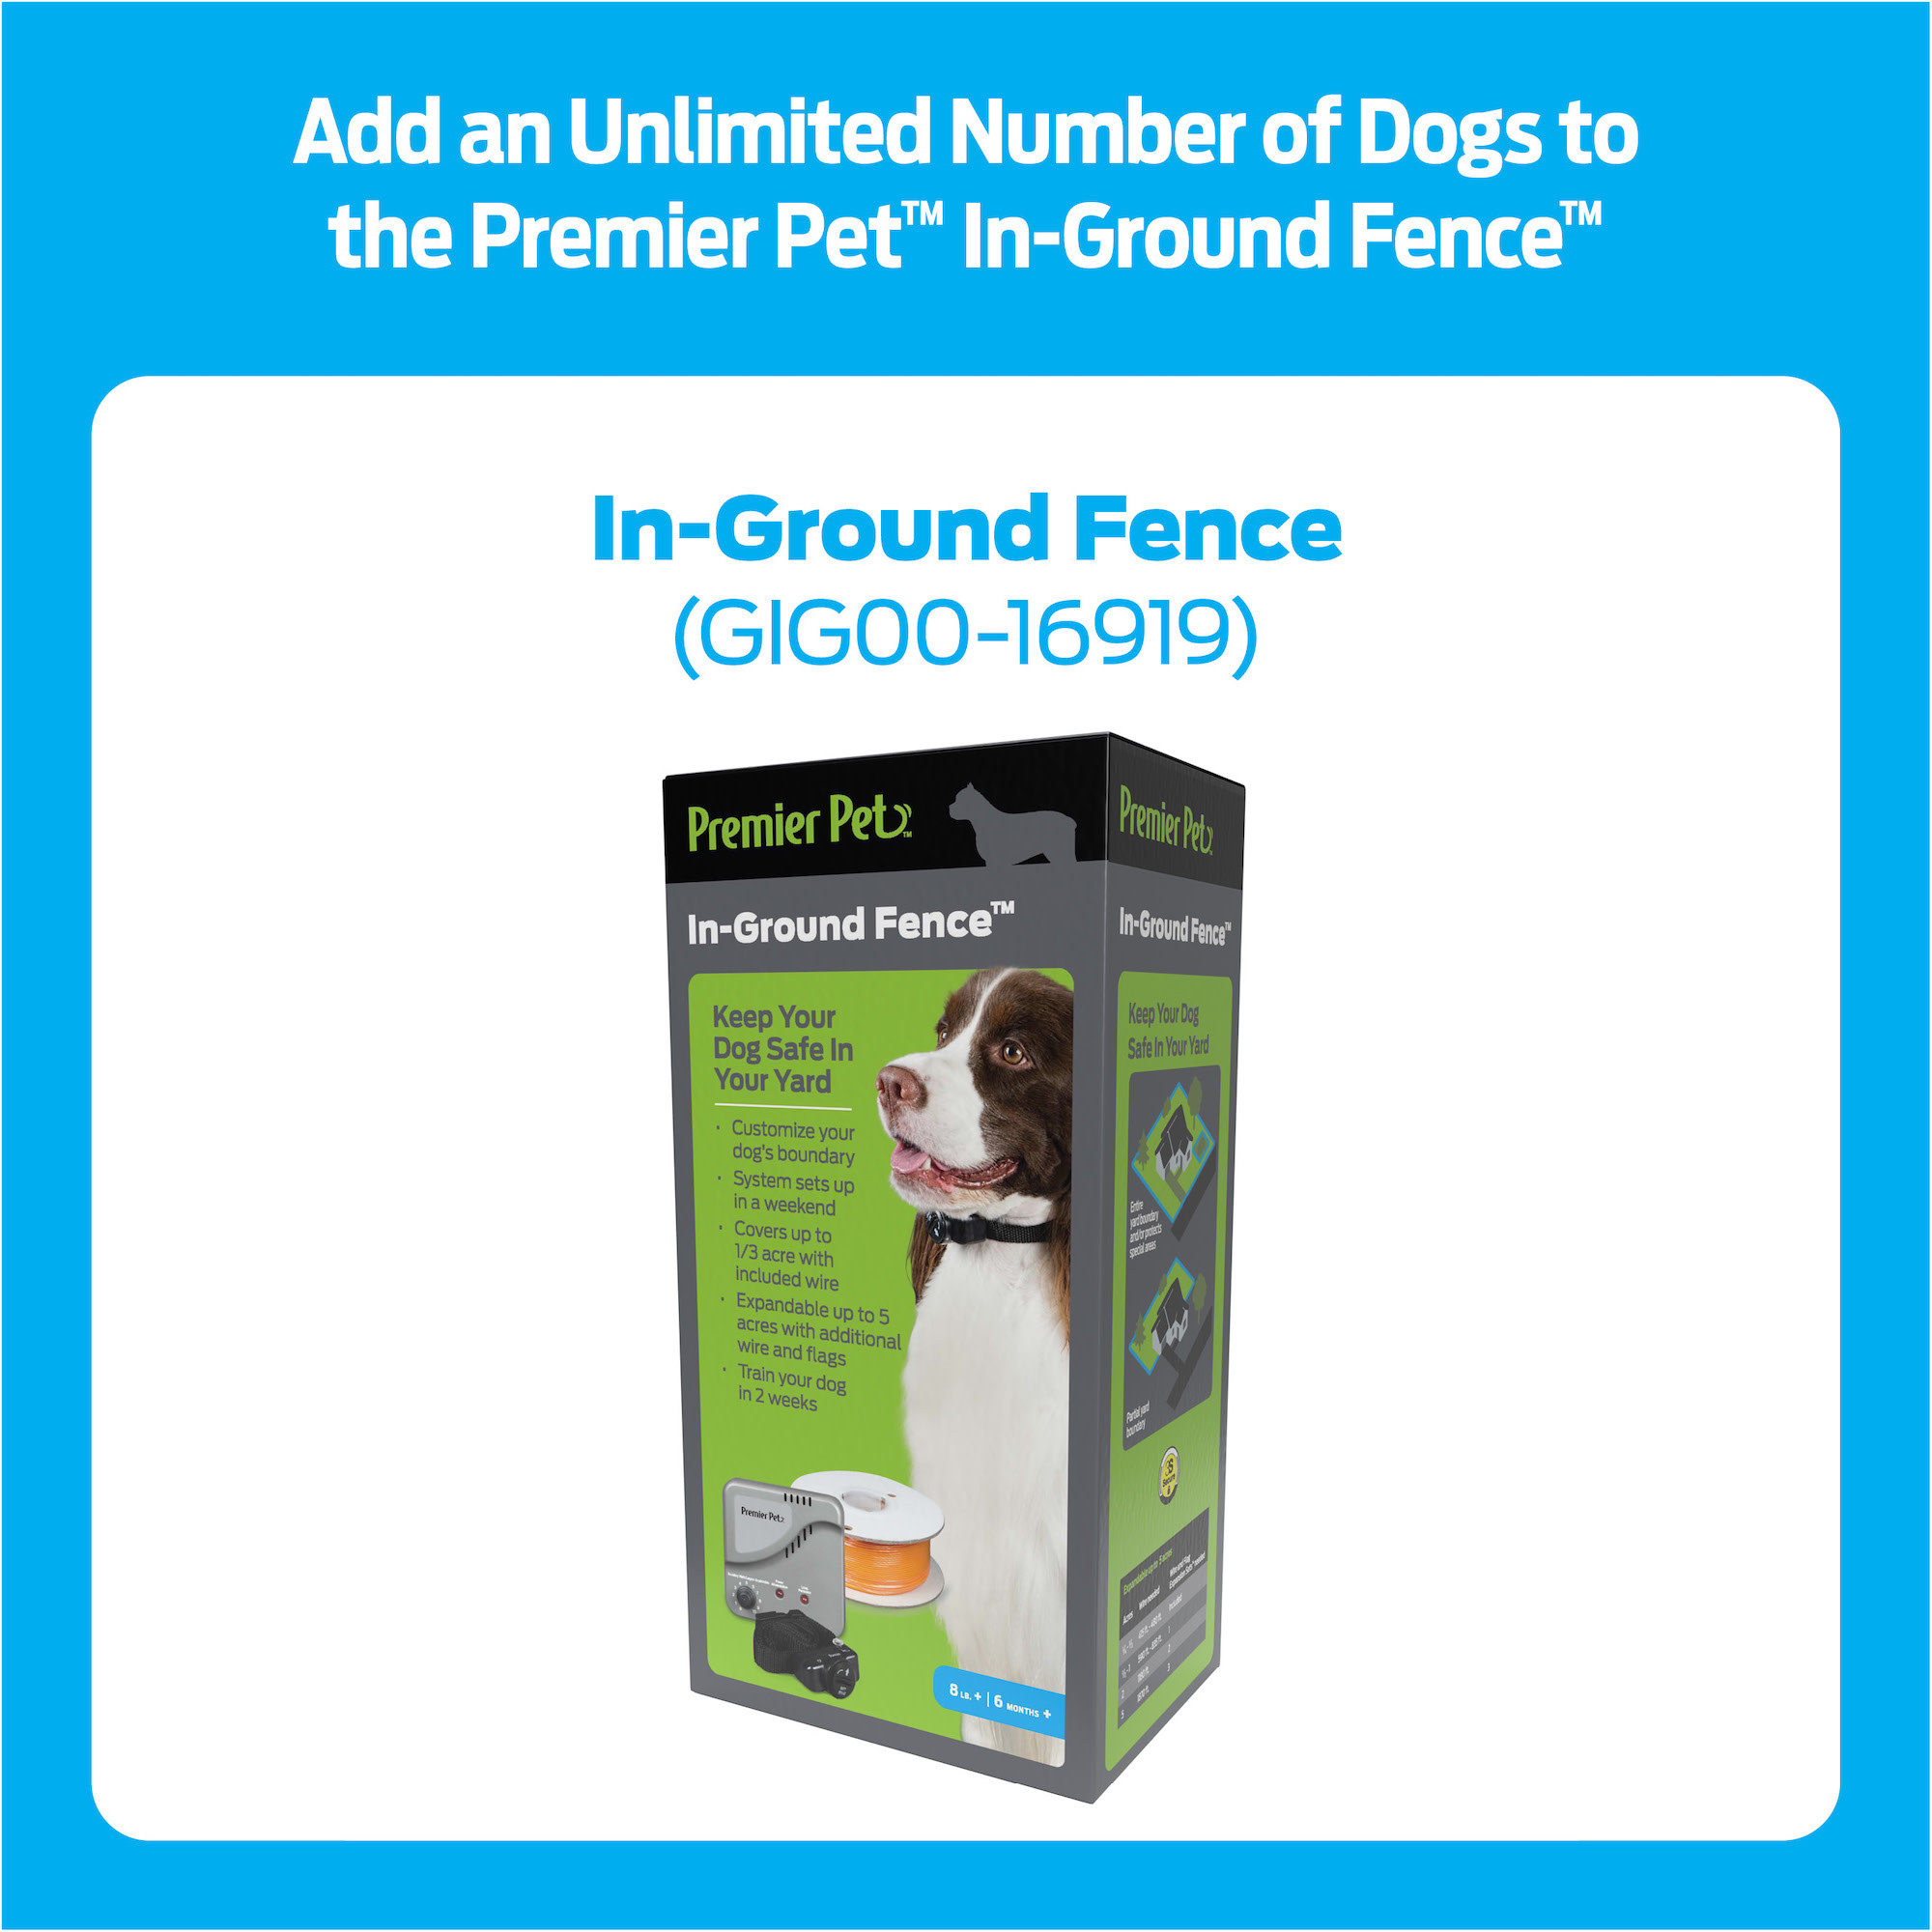 Premier Pet In-Ground Add-A-Dog: Adds Unlimited Dogs to Premier Pet In-Ground Fence, Additional or Replacement Collar, Adjustable, Waterproof, Tone & Static Correction, Low Battery Indicator - image 3 of 10